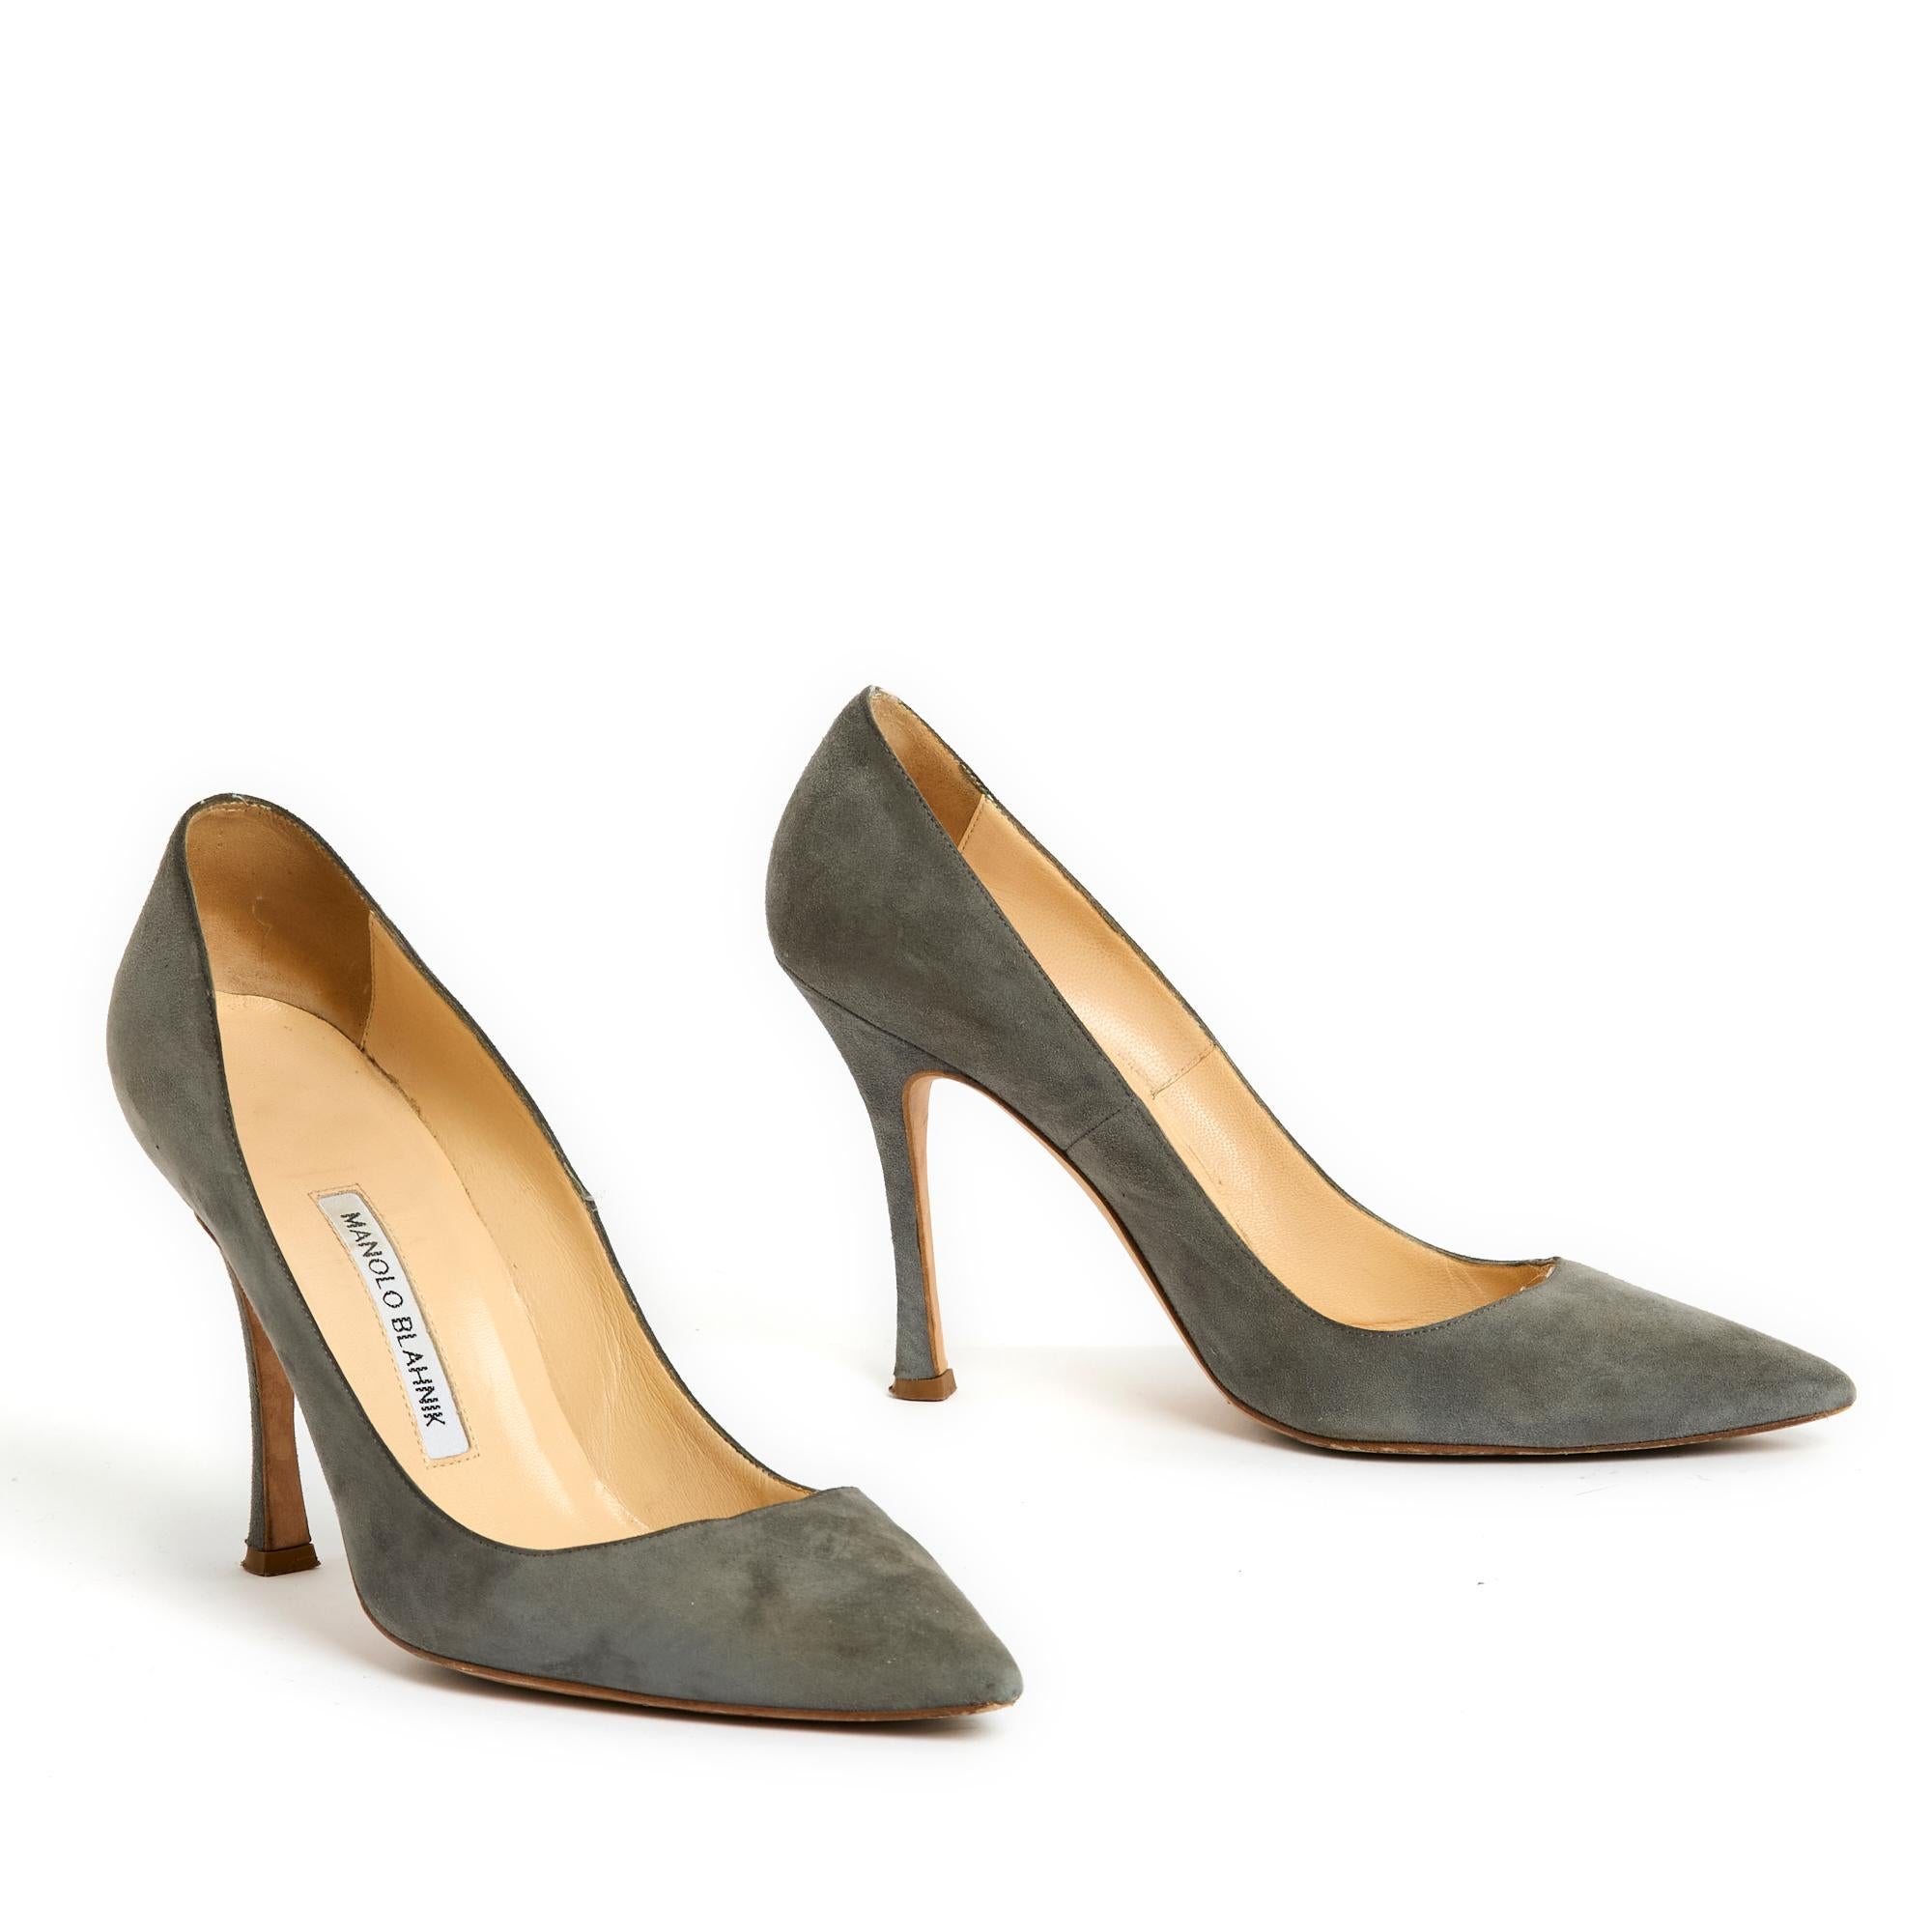 Manolo Blahnik pumps in grey suede, pointed toe, stiletto heel. Size 39EU i.e. UK 5.5 and US 7.5, heel 11 cm, insole 25 cm. The pumps have been worn only once and they are in perfect condition, magnificent on the feet...